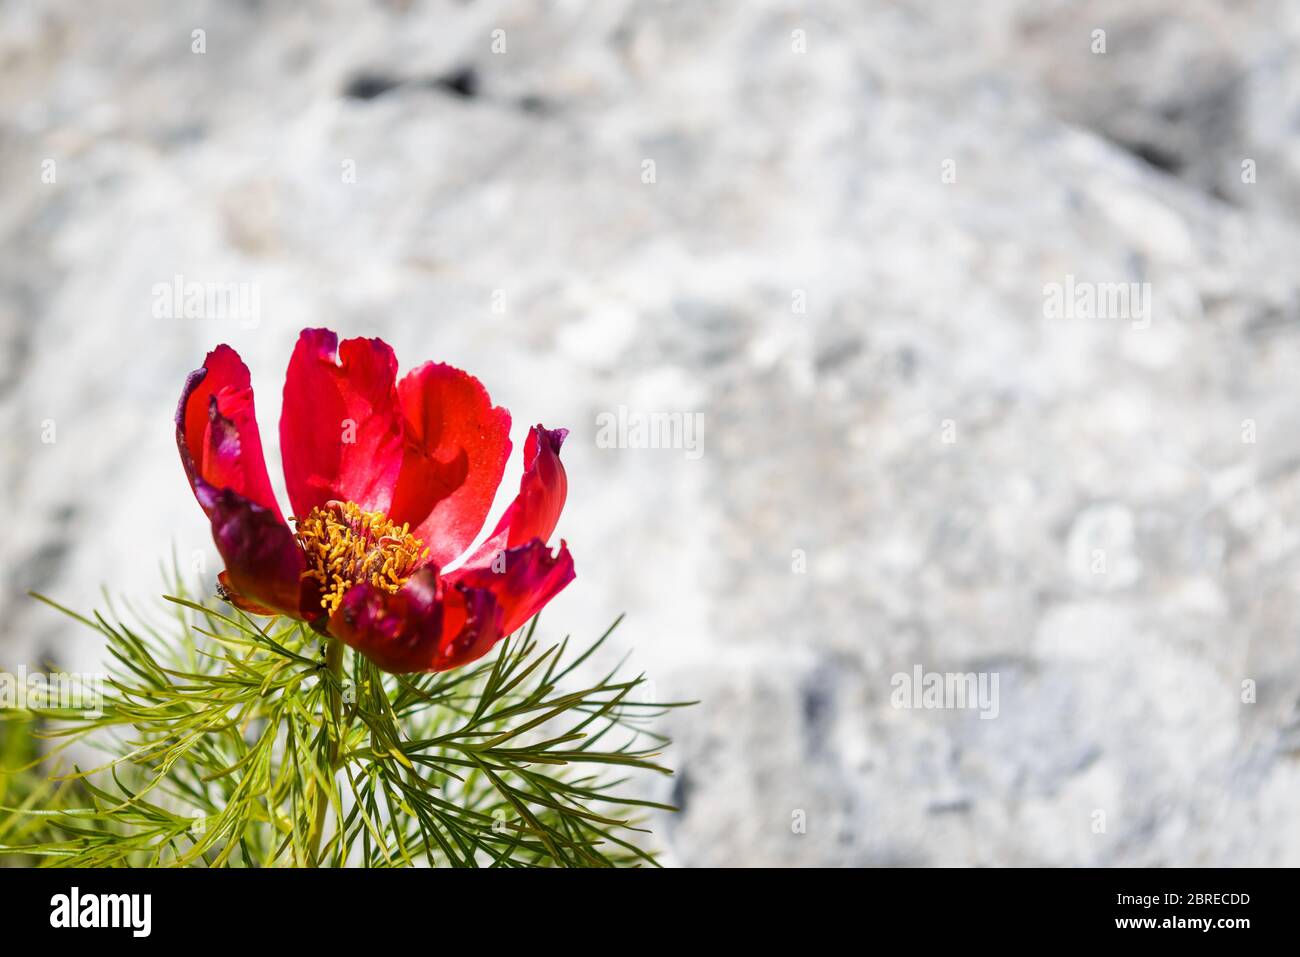 Red mountain peony flower on a stone background Stock Photo